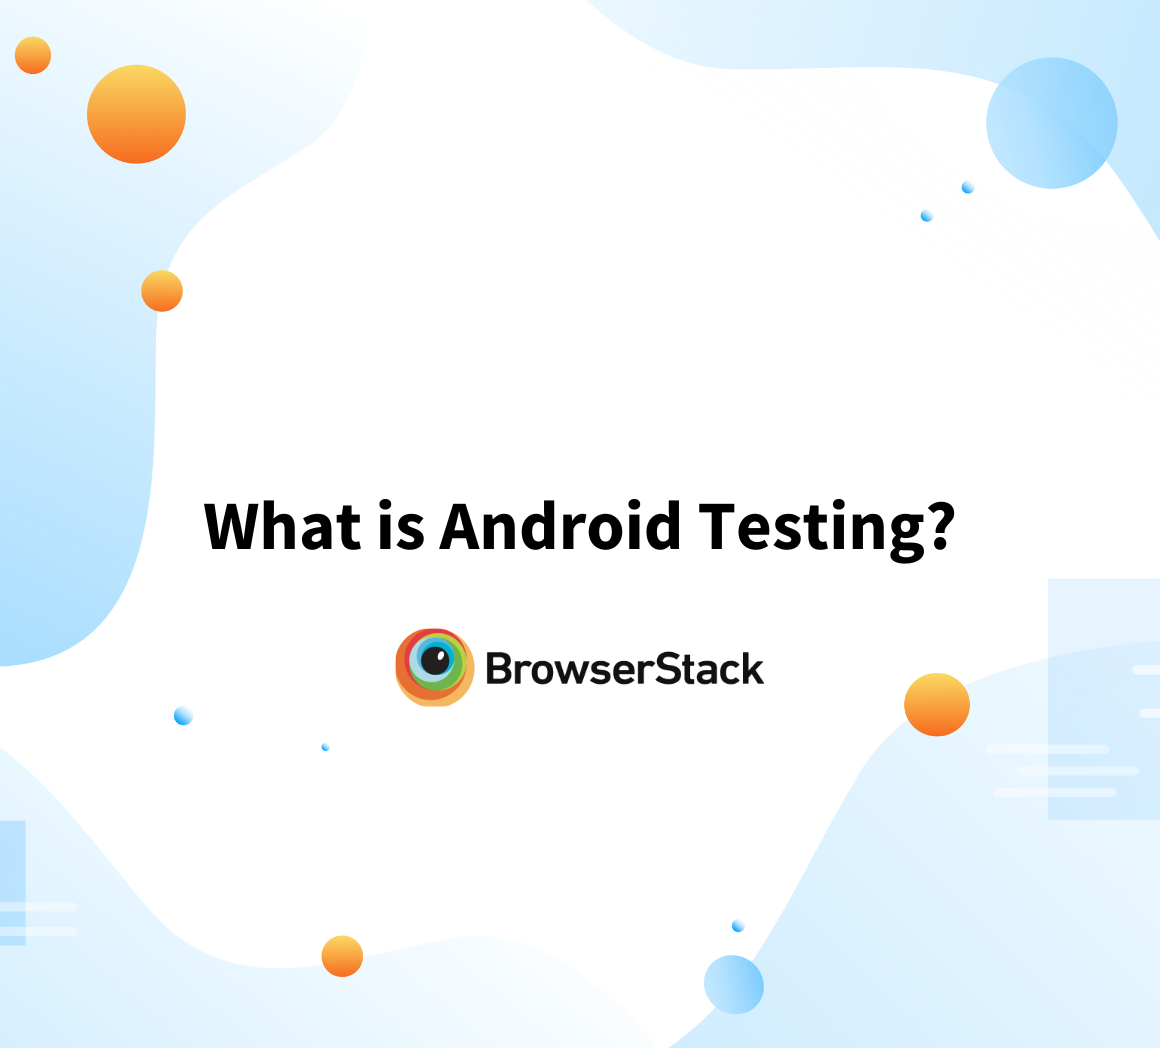 What is Android Testing